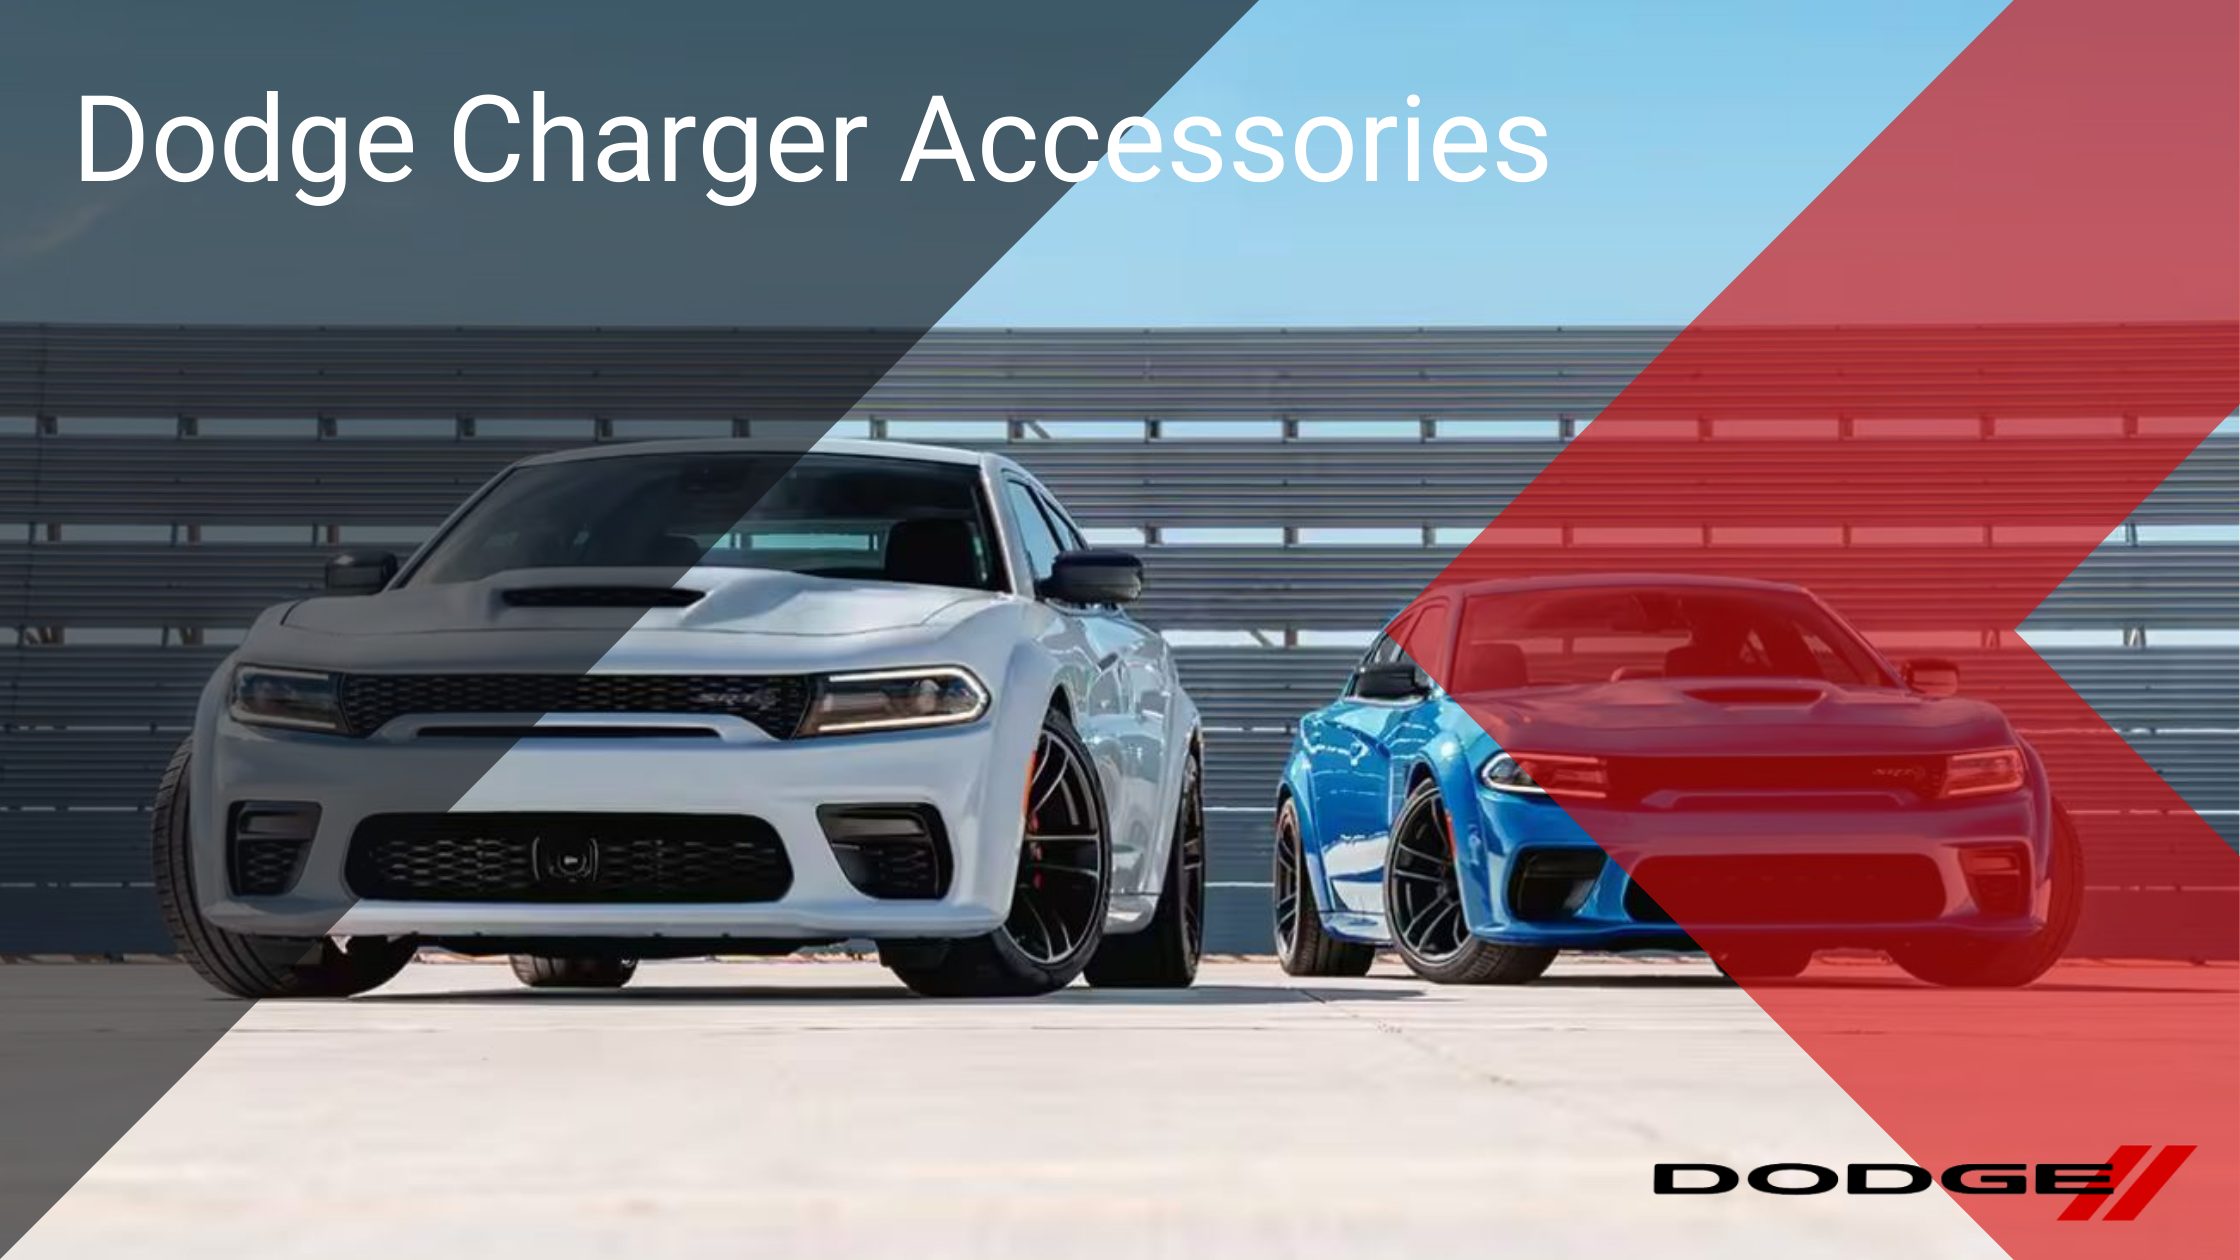 Dodge Charger Accessories